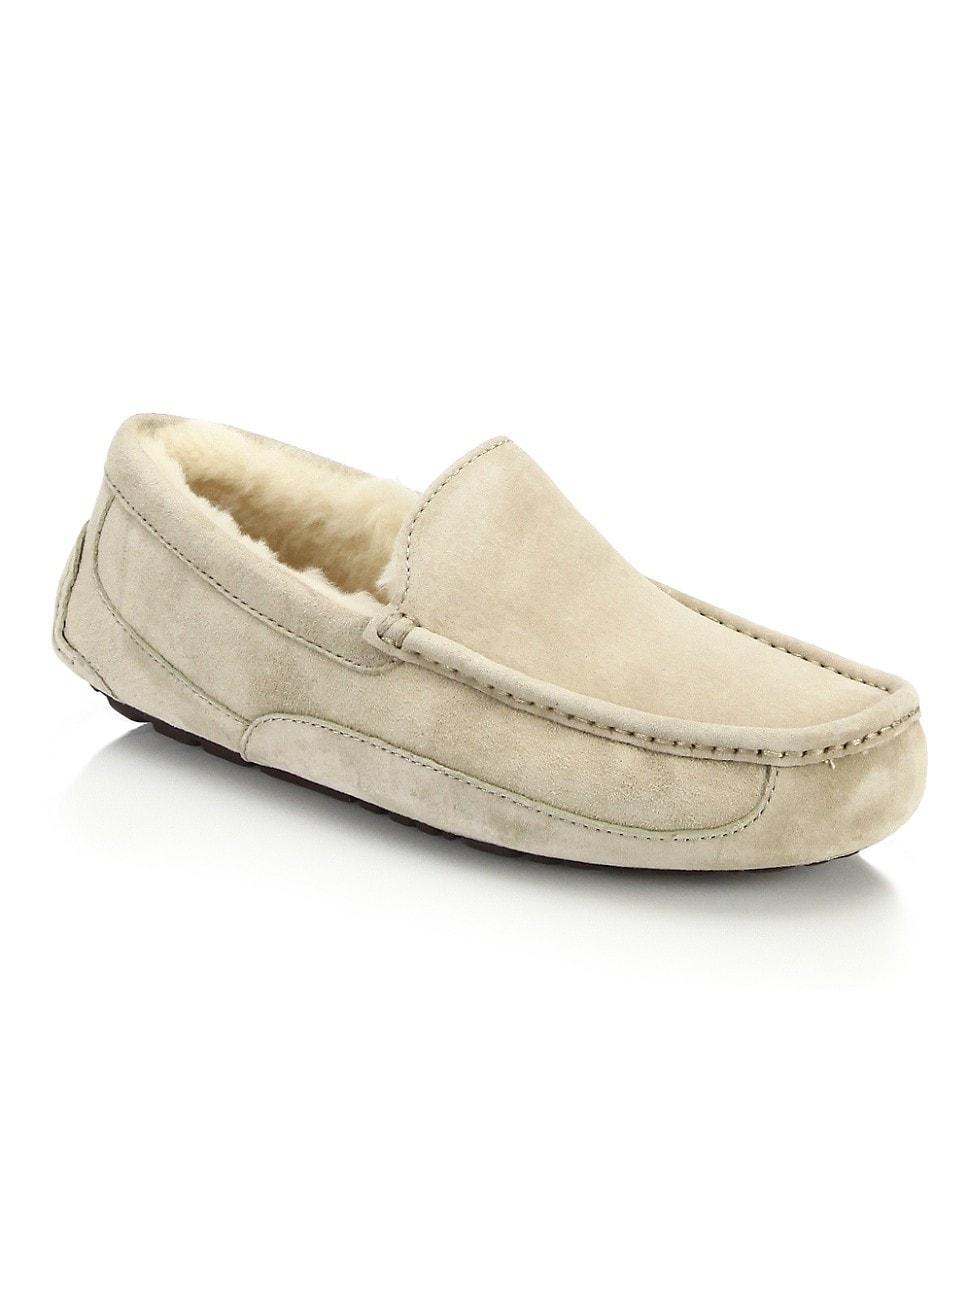 Mens Ascot Suede Slippers Product Image